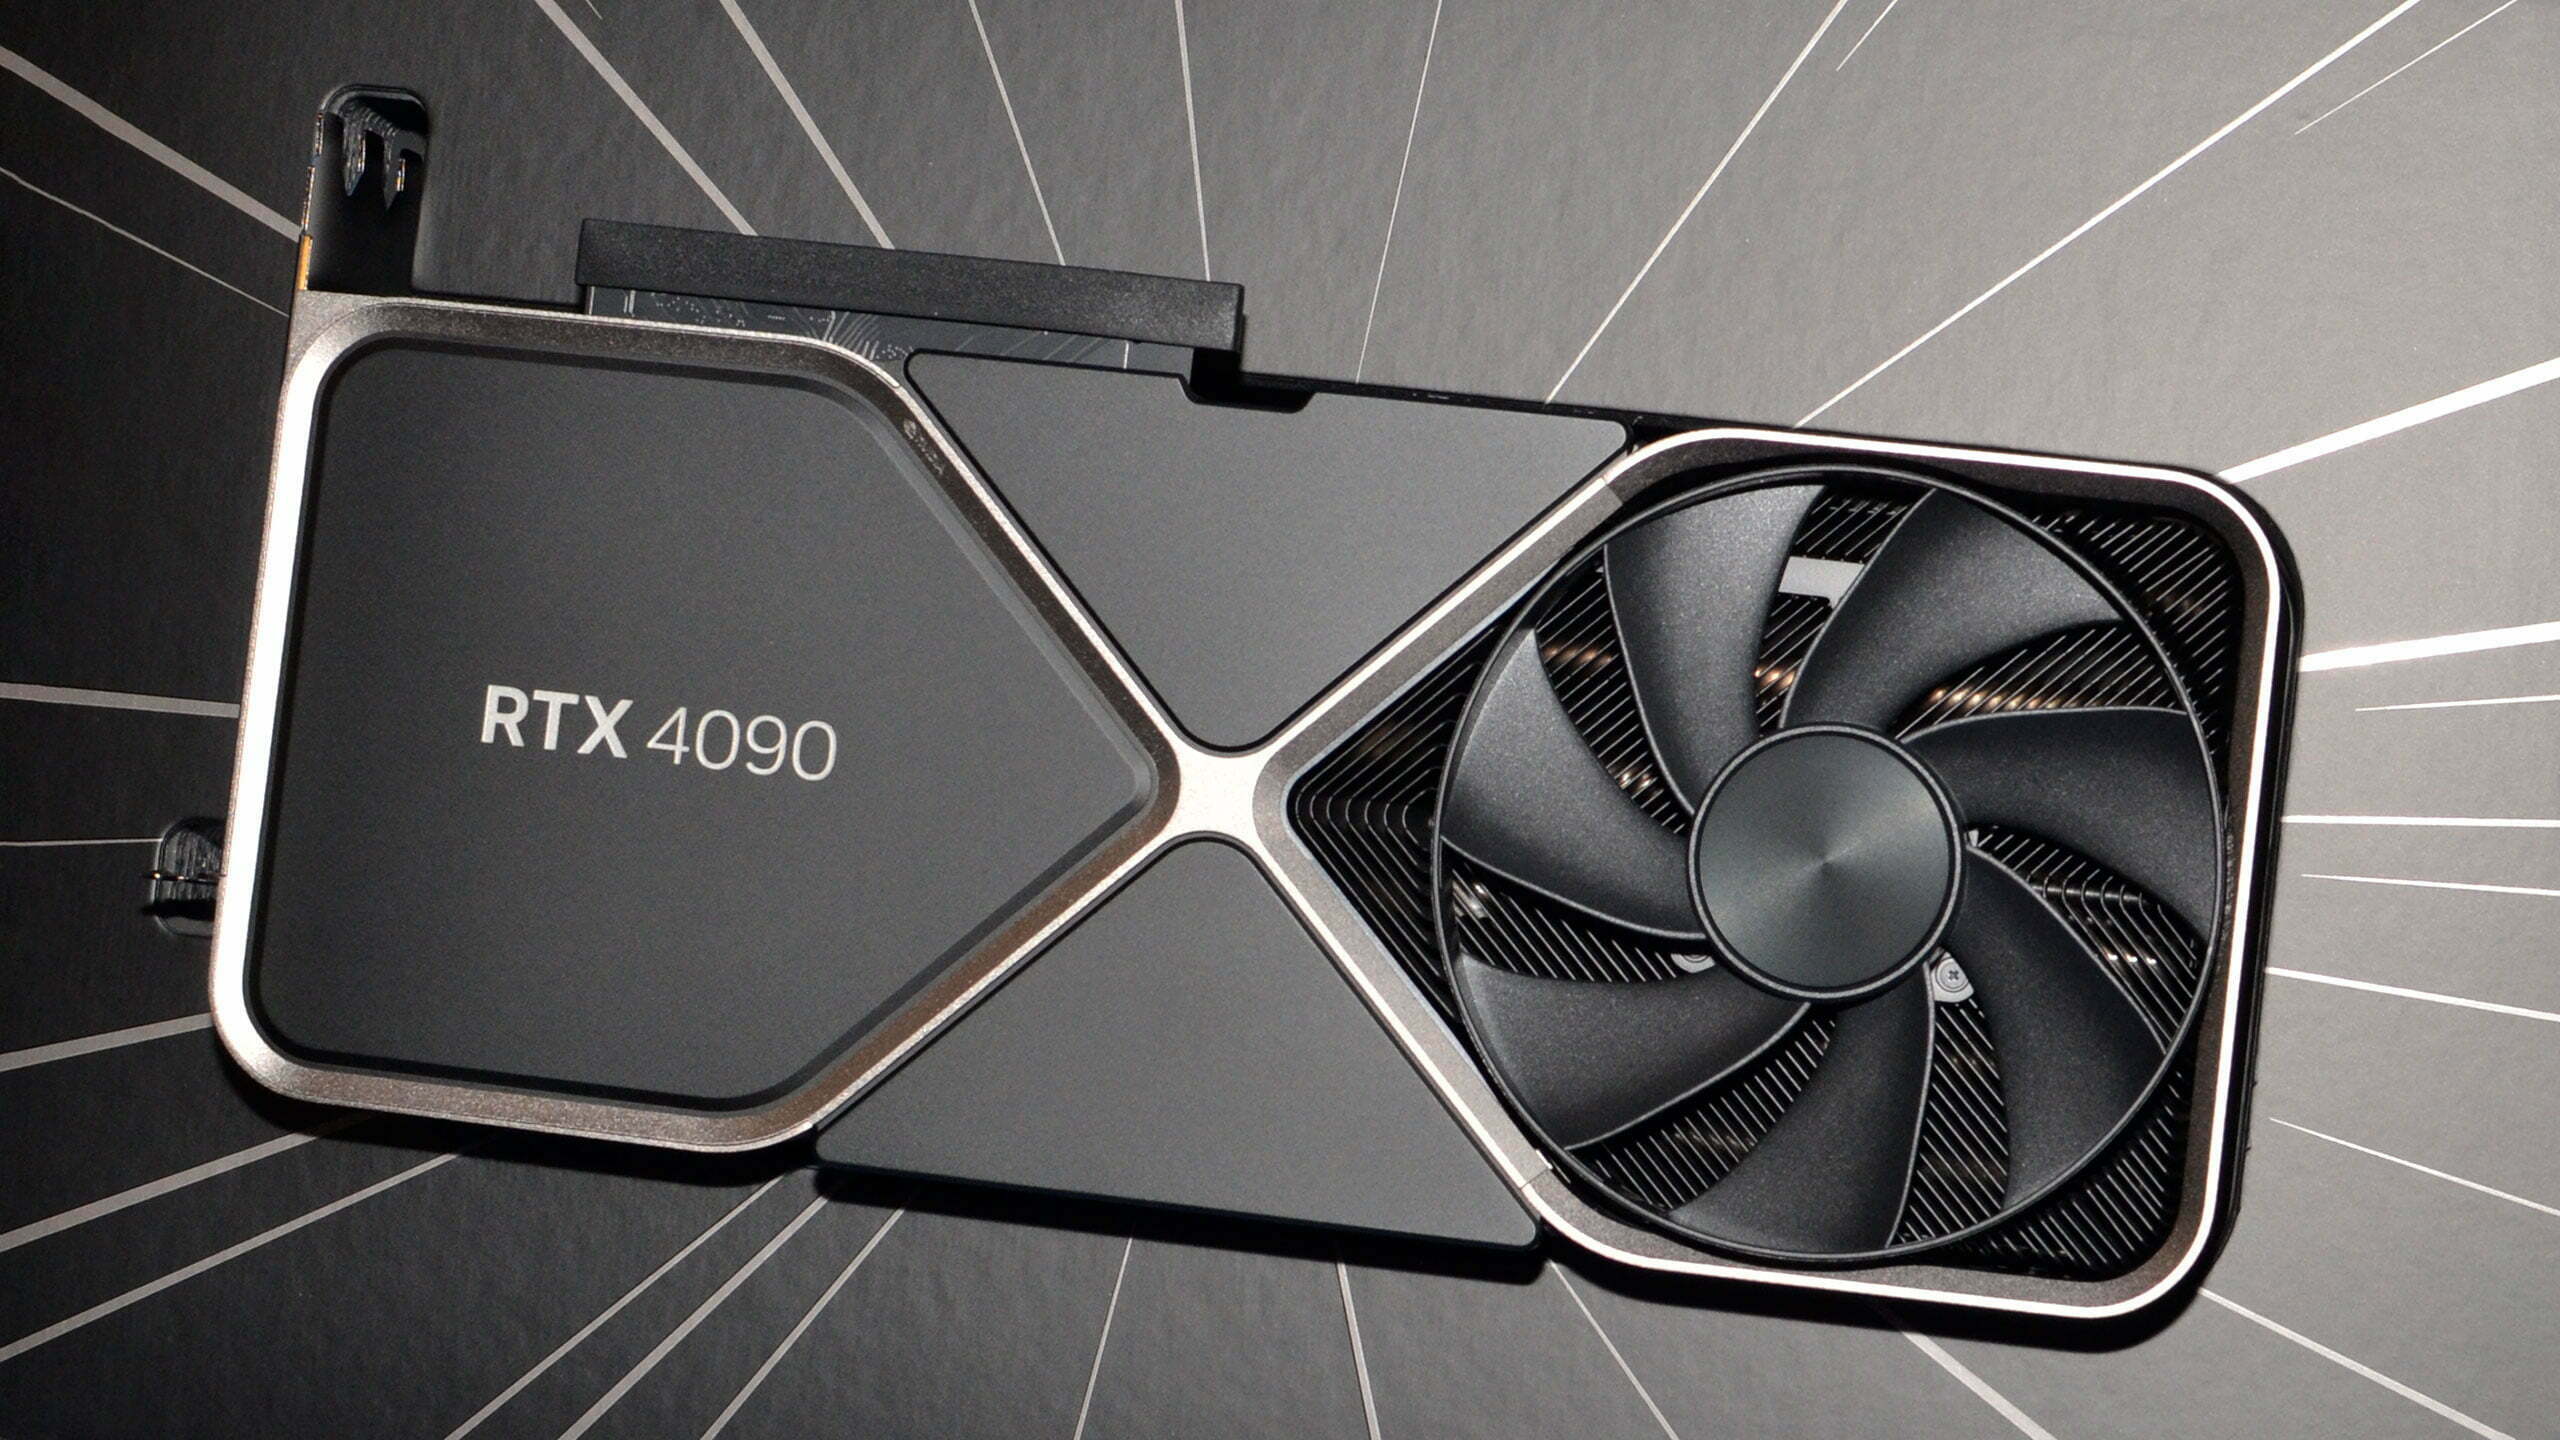 The 20 Most Expensive Graphics Card in the World